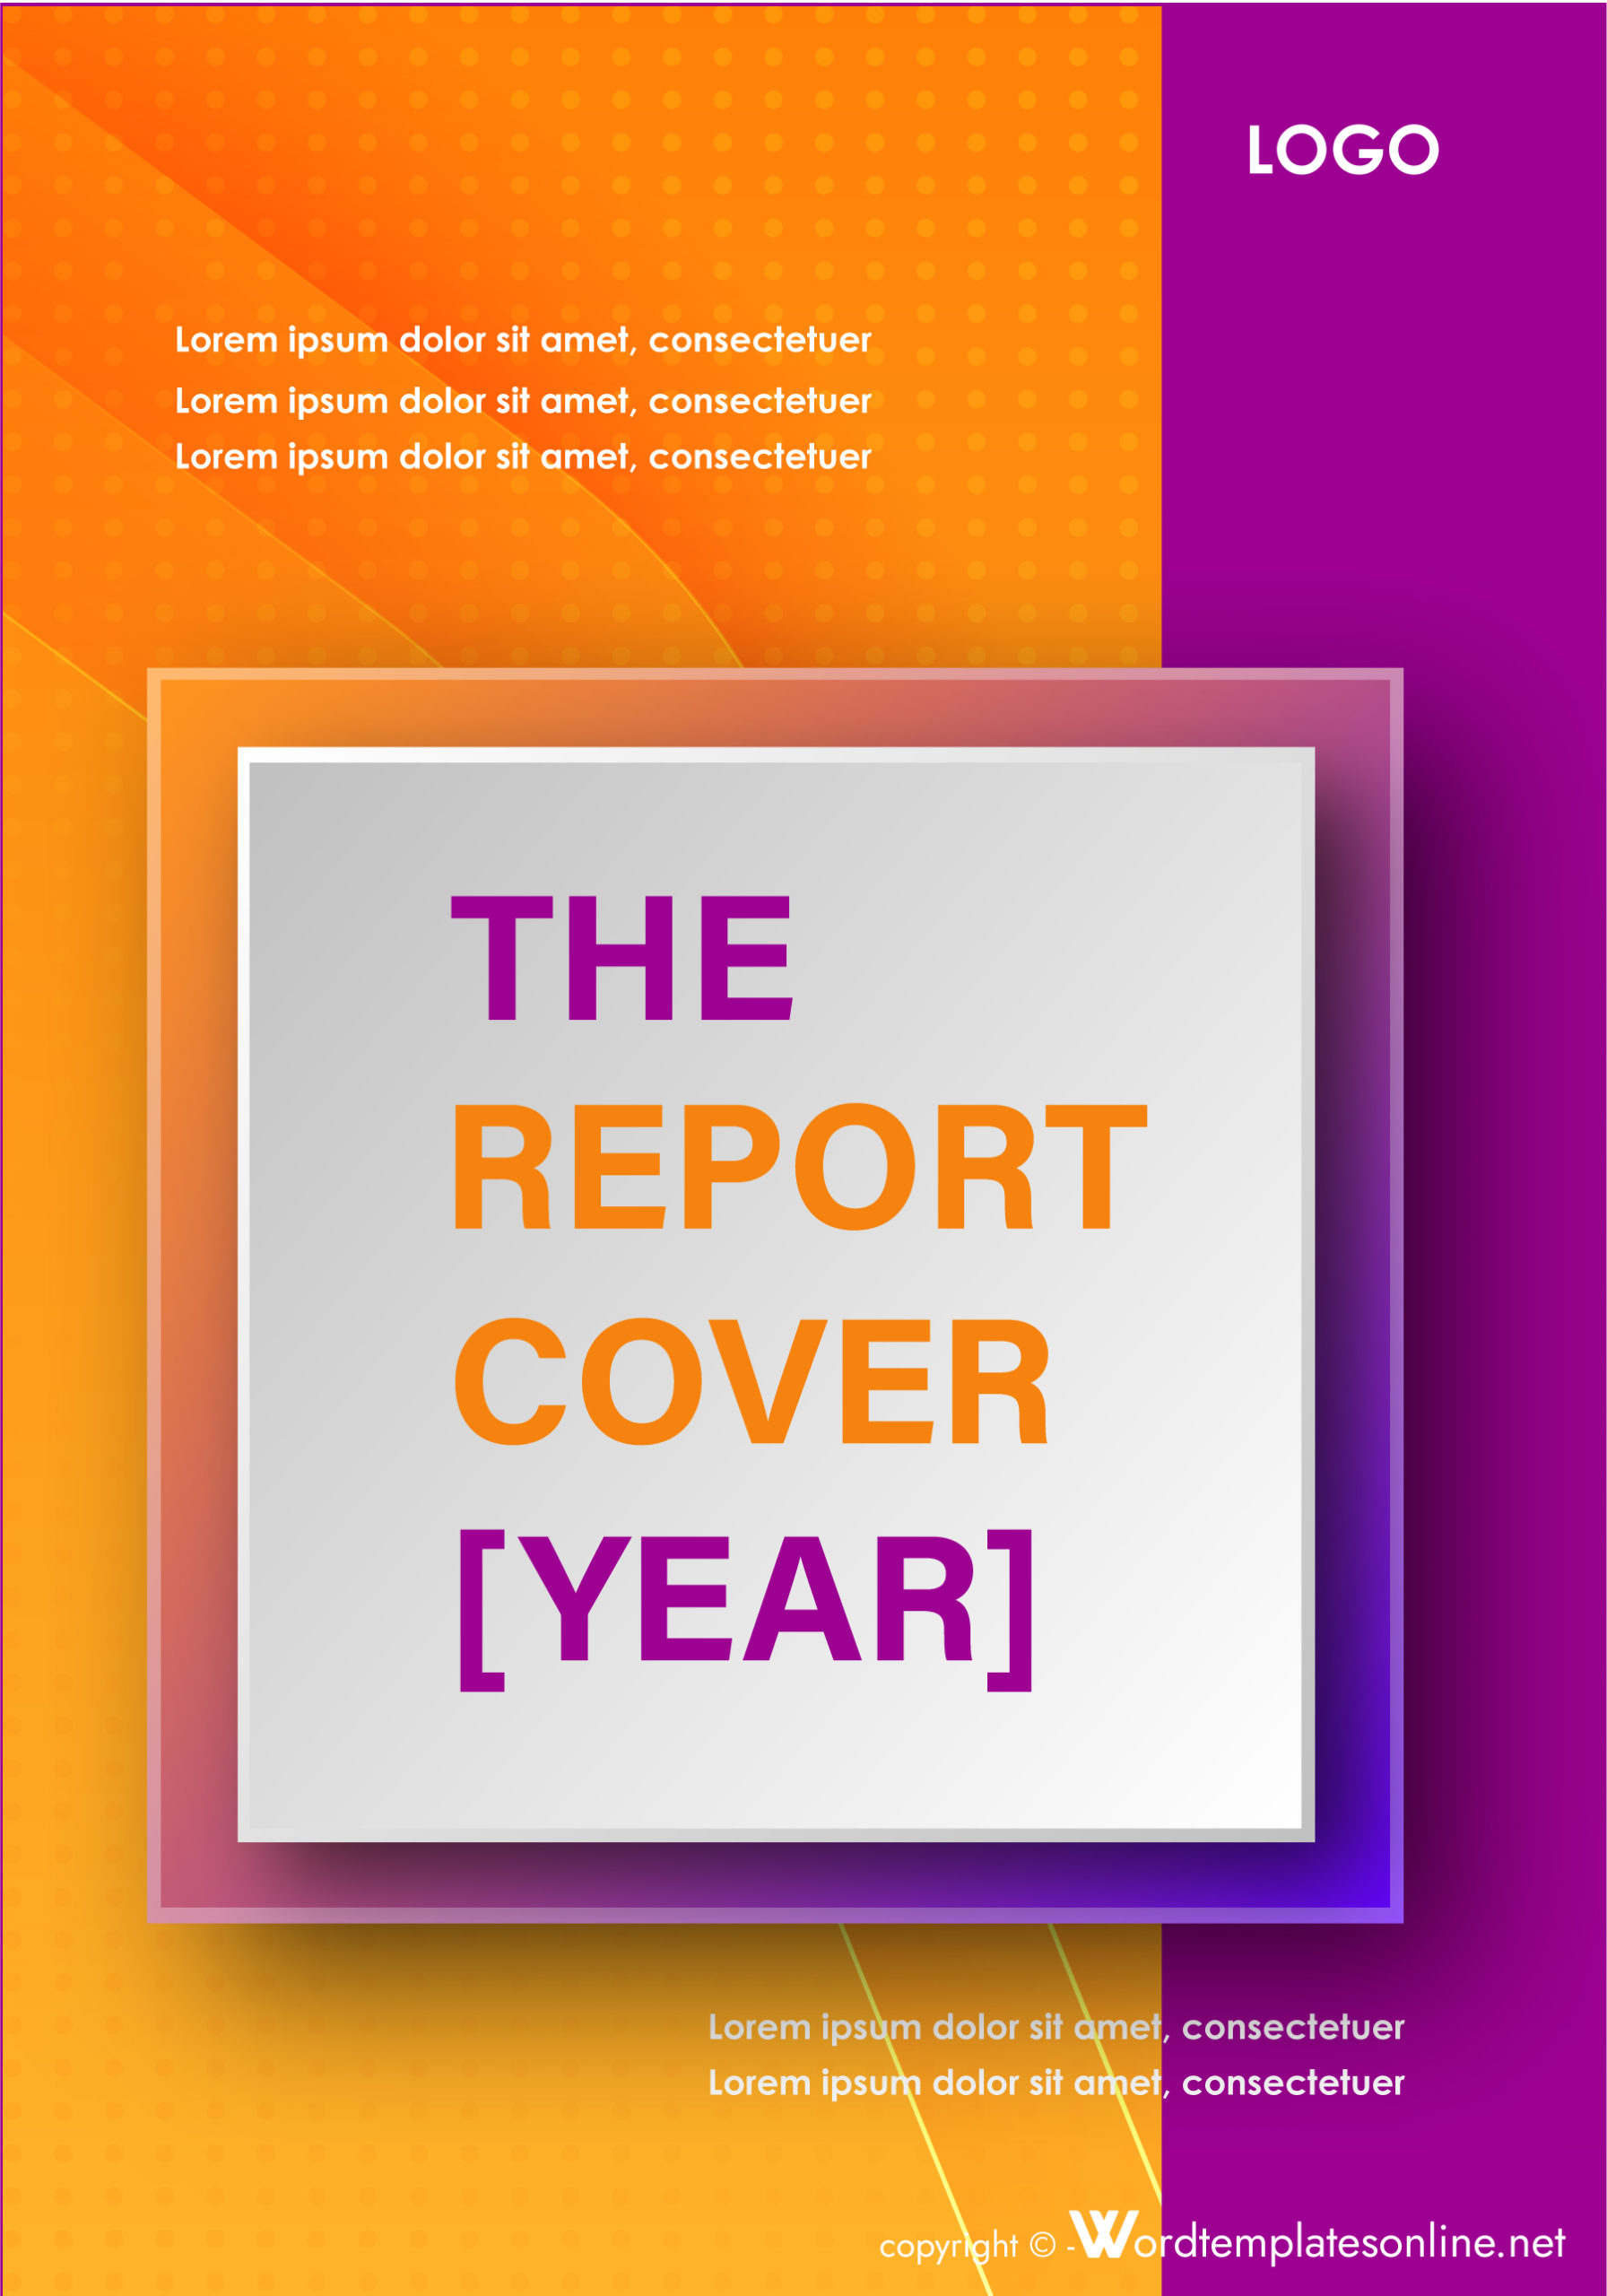 Editable Final Report Cover Page Template - Free Download